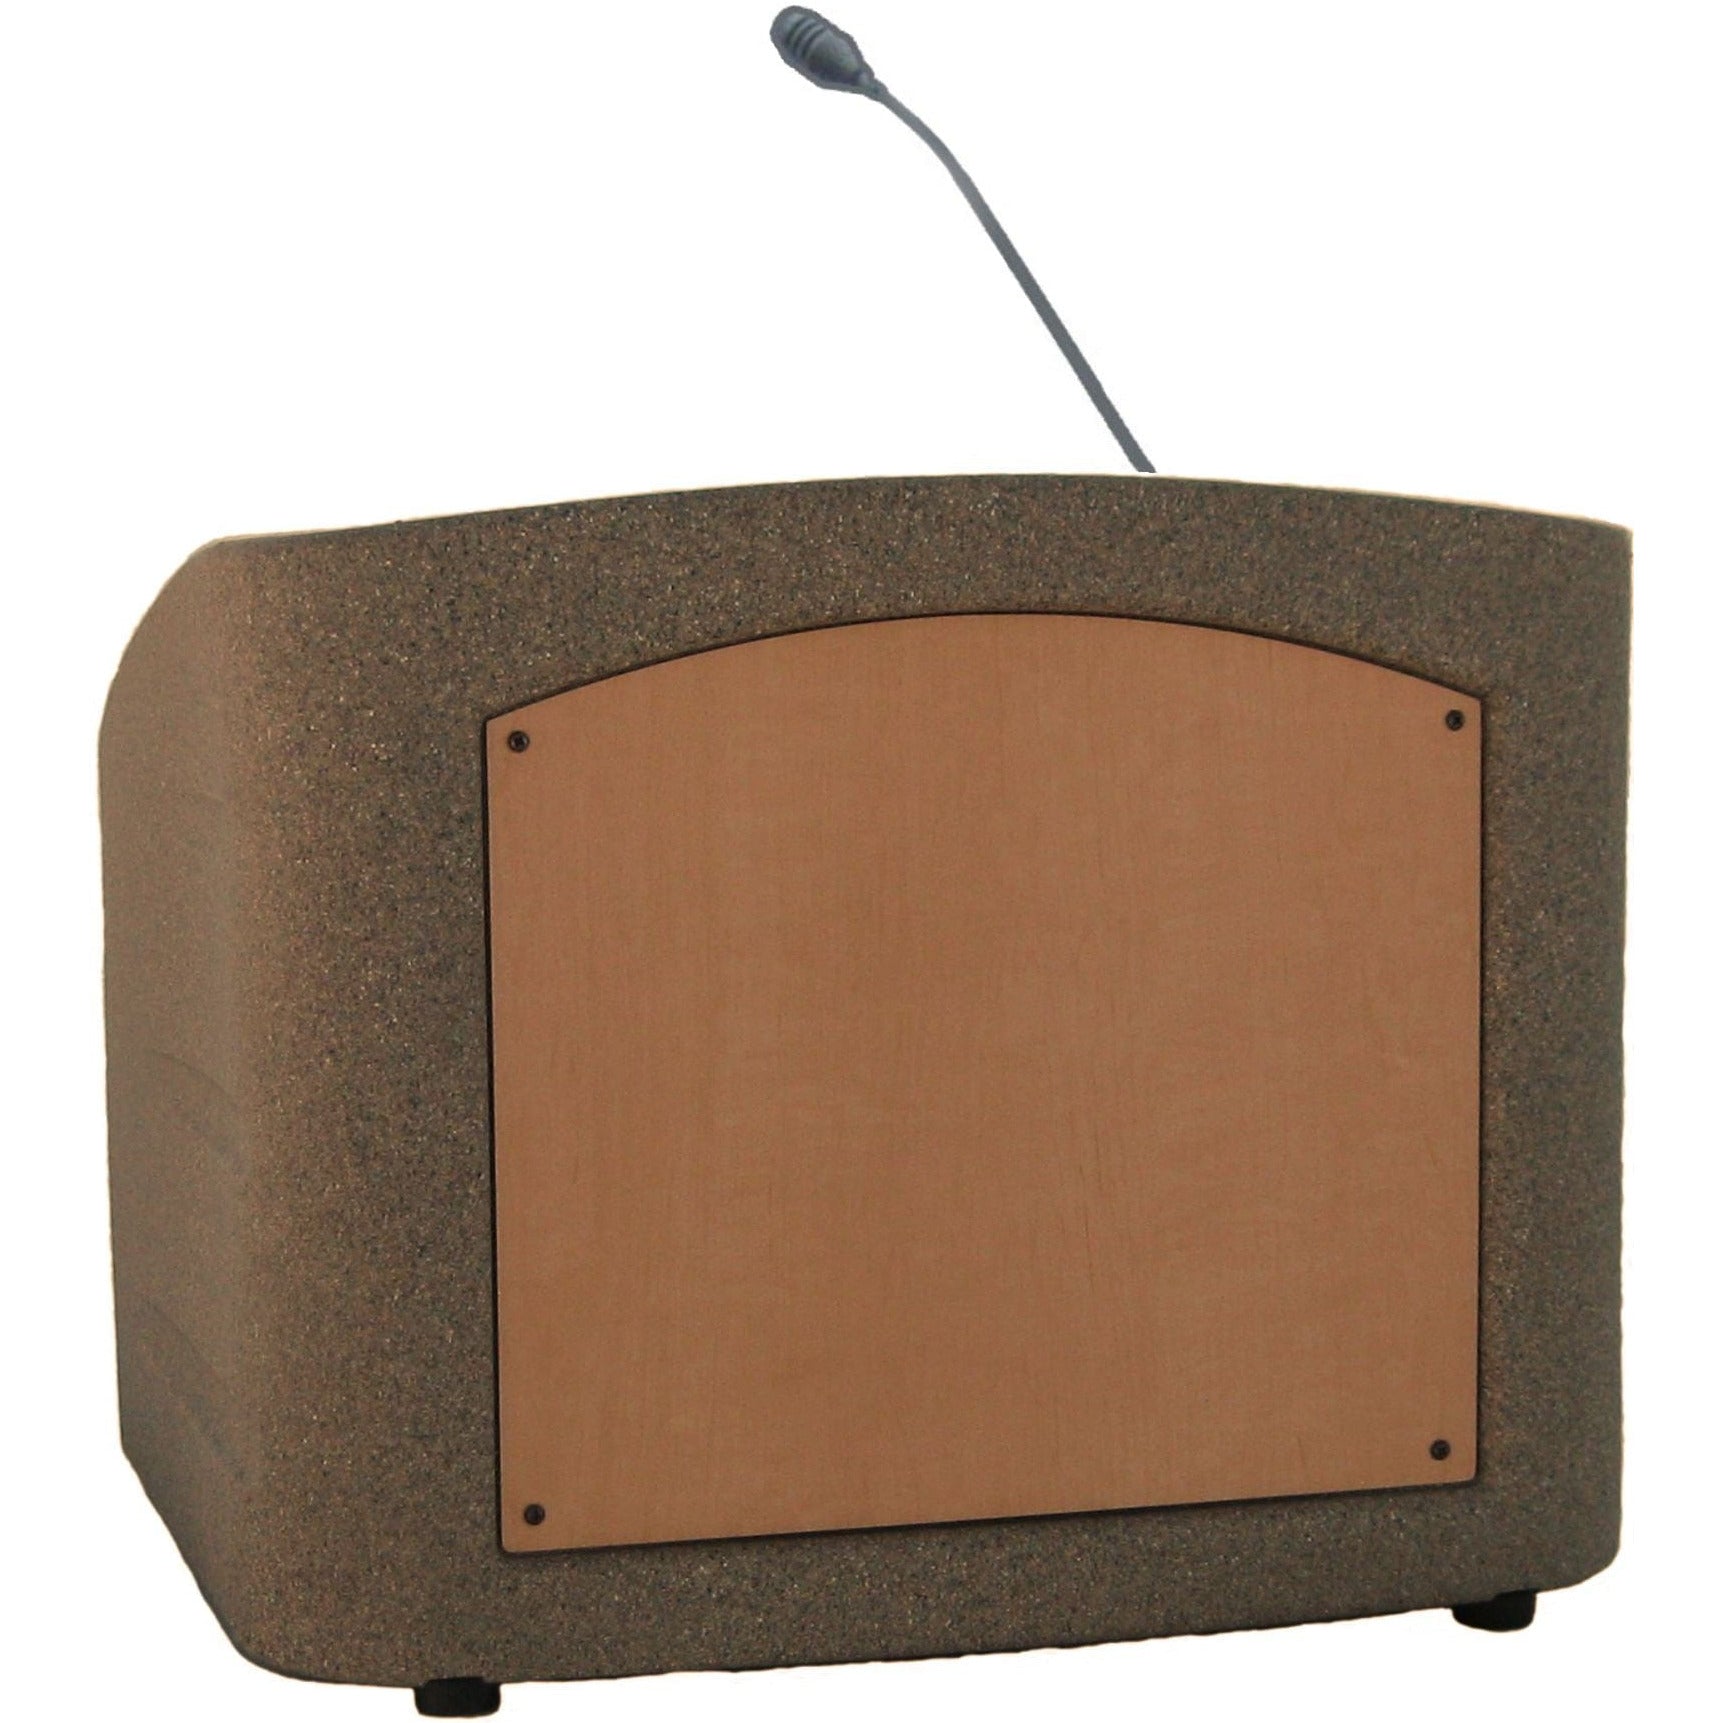 tabletop lectern with microphone in beige